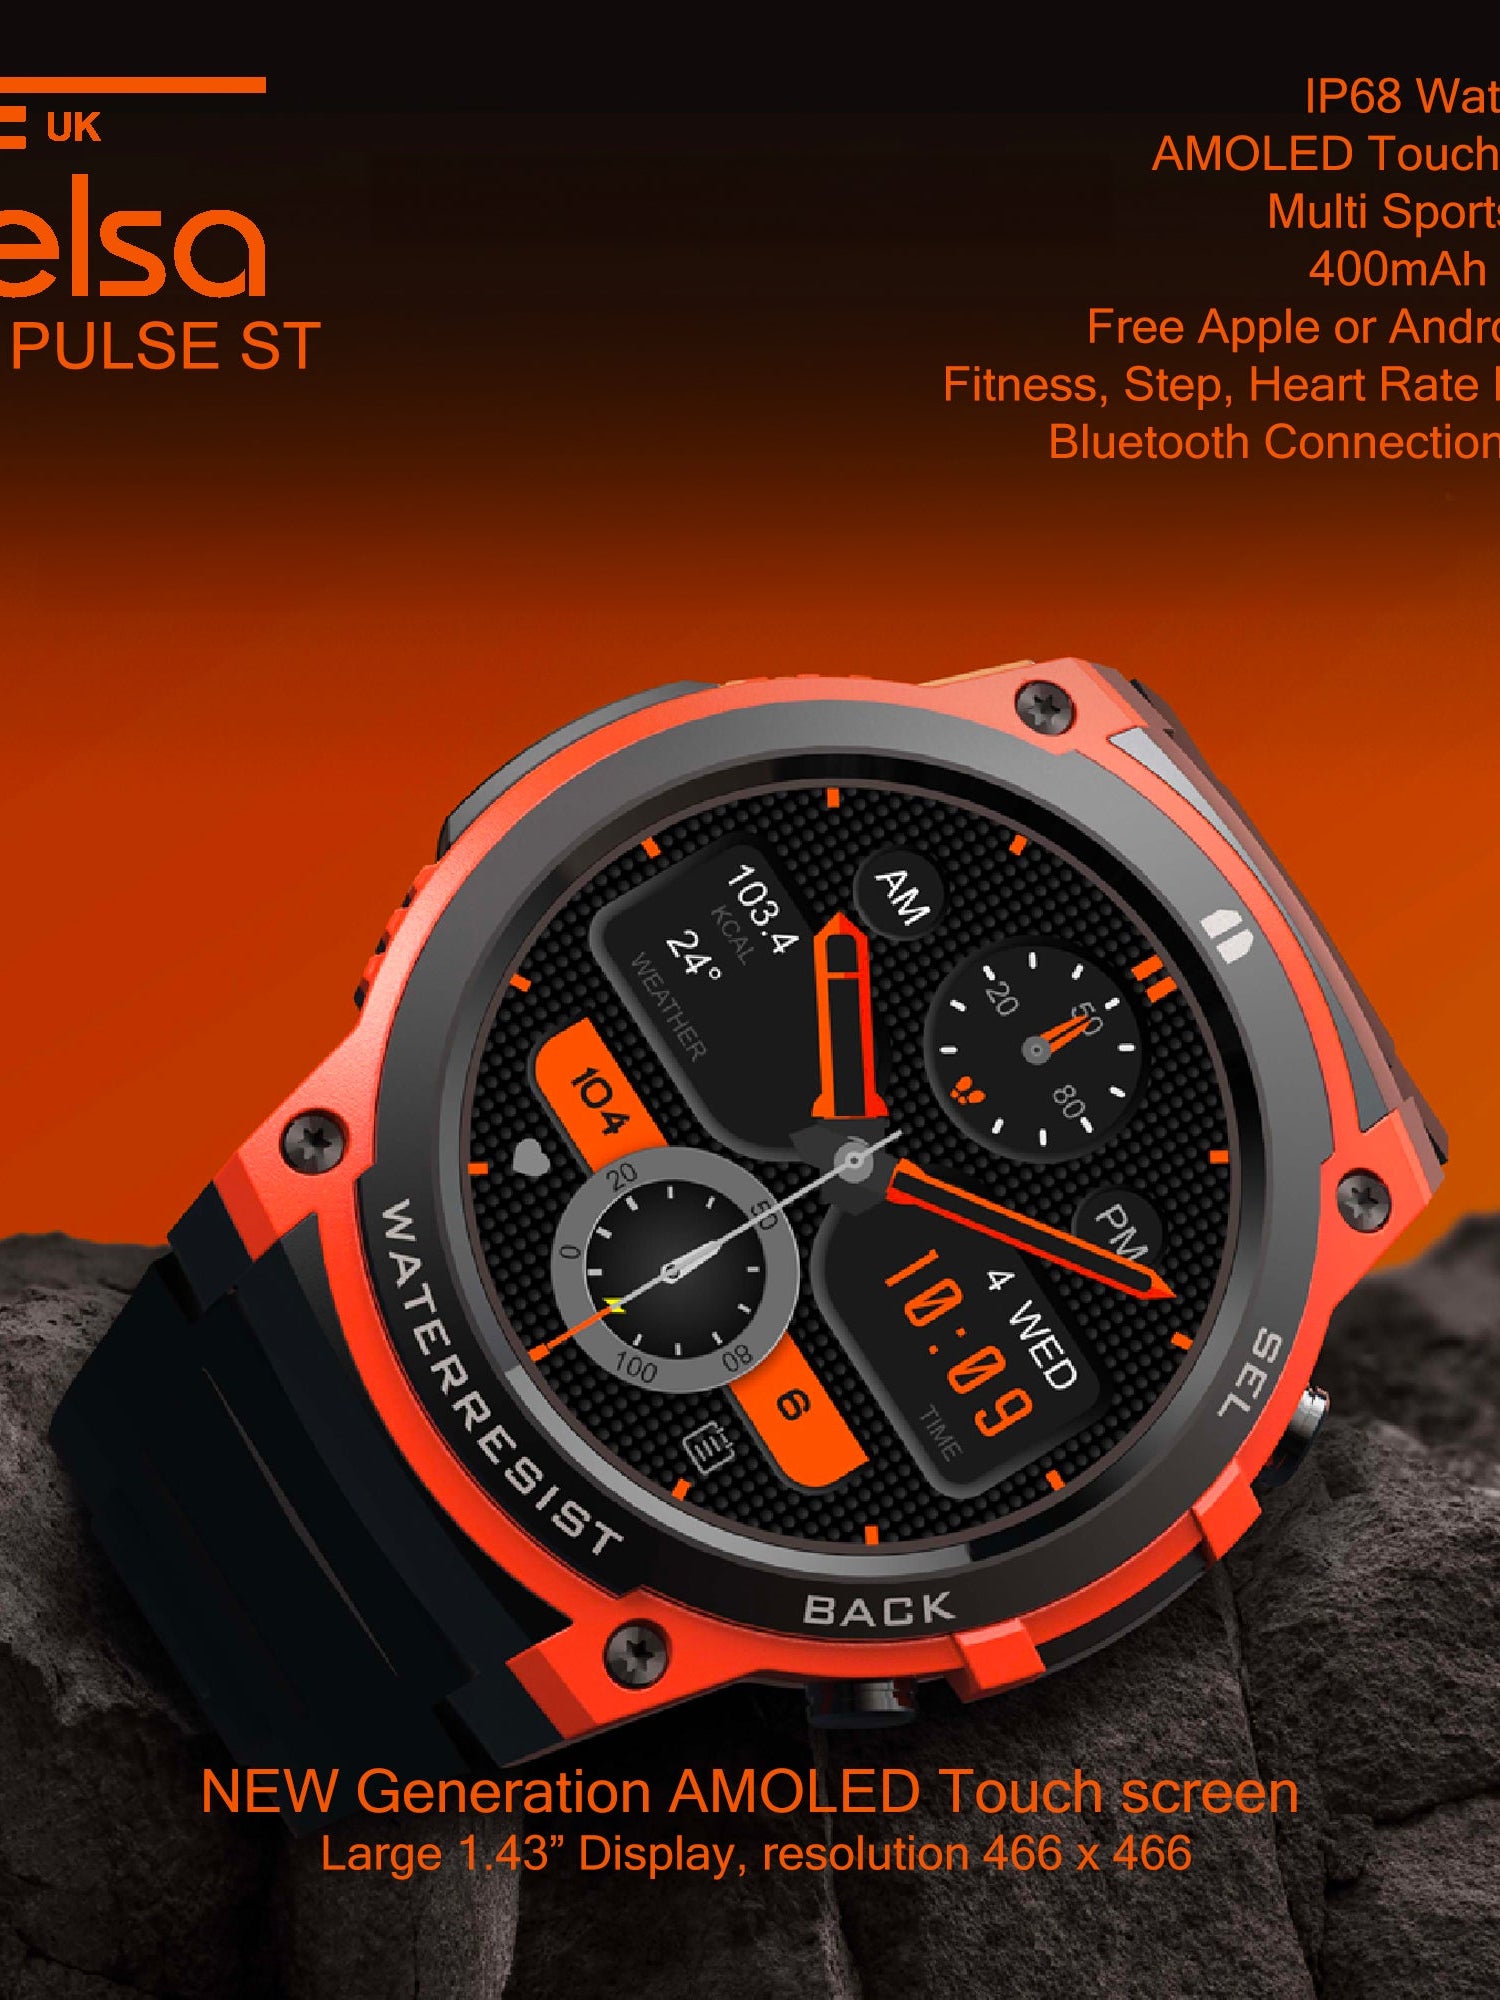 4elementsclothingTelsaDM55 Pulse AMOLED touchscreen IP68 Waterproof - Smart Watch for Men Women, 1.43" Smartwatch, Fitness Watch with Heart Rate Sleep Monitor, Step Counter, 100+ Sports, Fitness Smartwatches / Android IOSWatch5060976971396